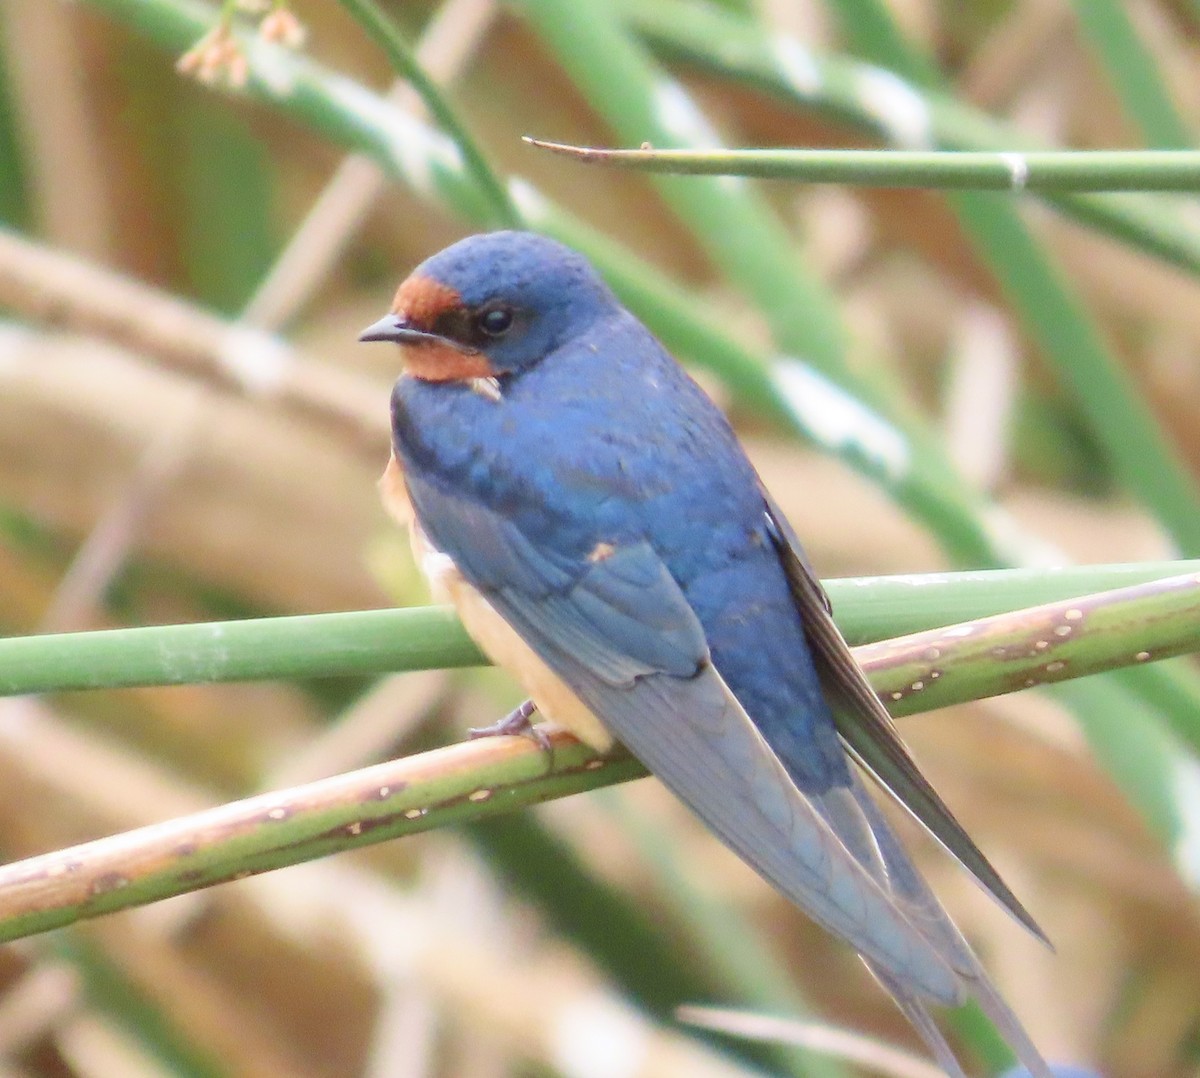 Barn Swallow - The Spotting Twohees